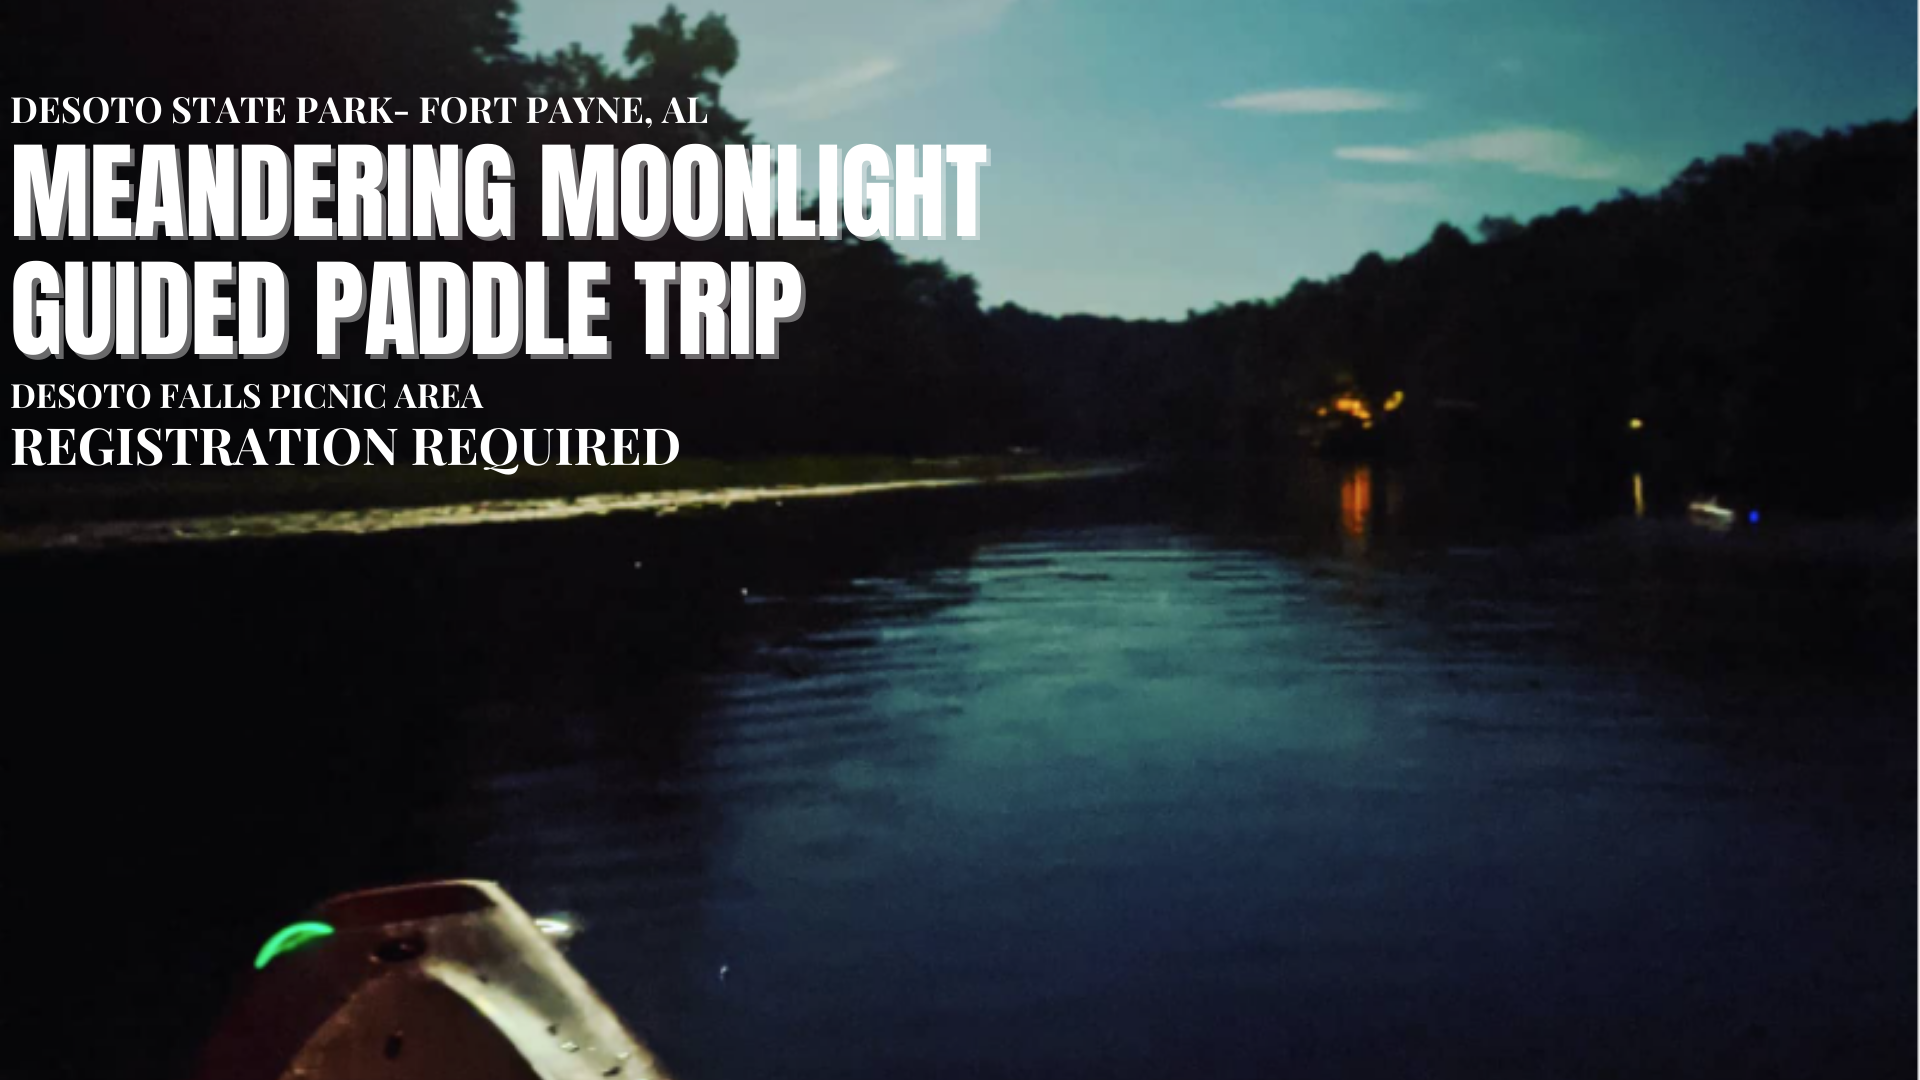 DSP Meandering Moonlight Guided Paddle Trip